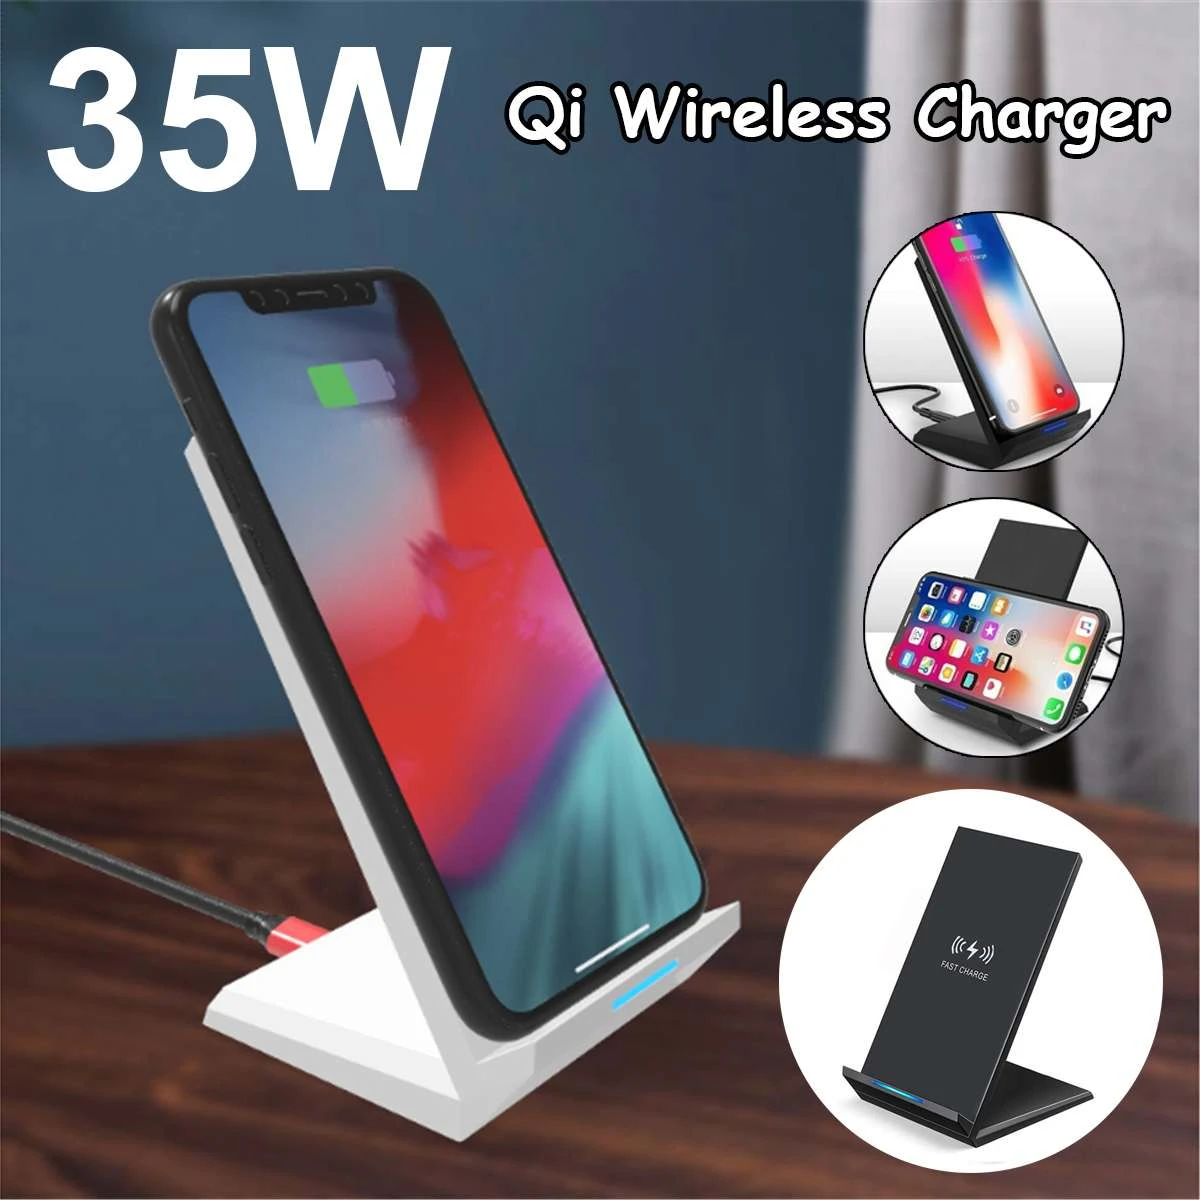 35W Qi Snel Opladen Dock Station Telefoon Oplader Draadloze Oplader Stand Voor Iphone X Xs Max Xr 11 Pro Samsungs S20 S10 S9|Opladers voor telefoons| - AliExpress